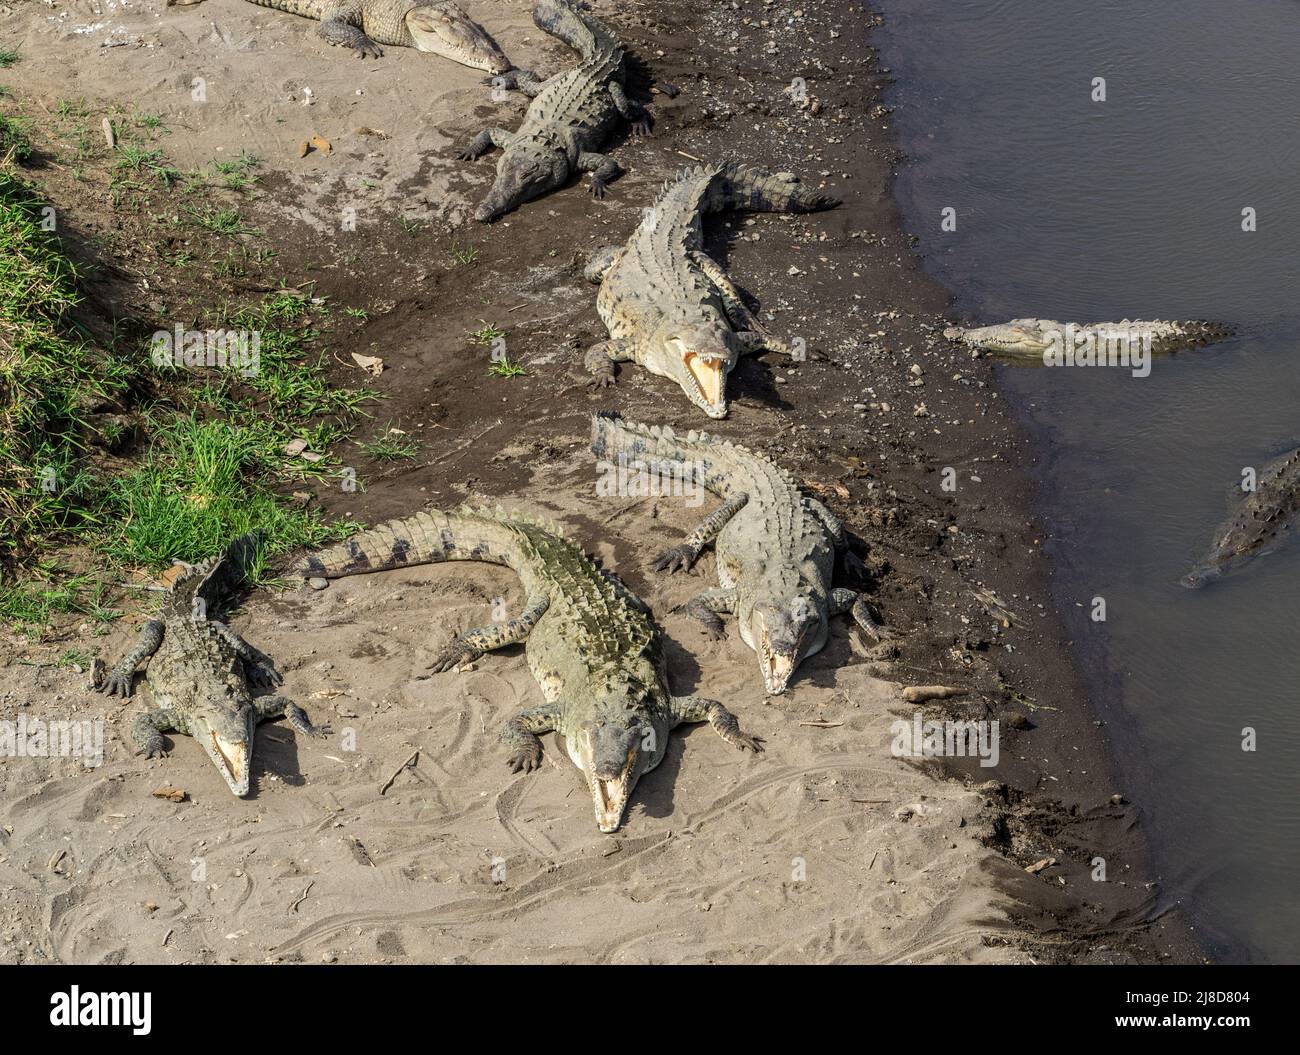 Four American crocodiles (Crocodylus acutus) have their mouths open in order to cool off at the Tarcoles River, Costa Rica. Stock Photo